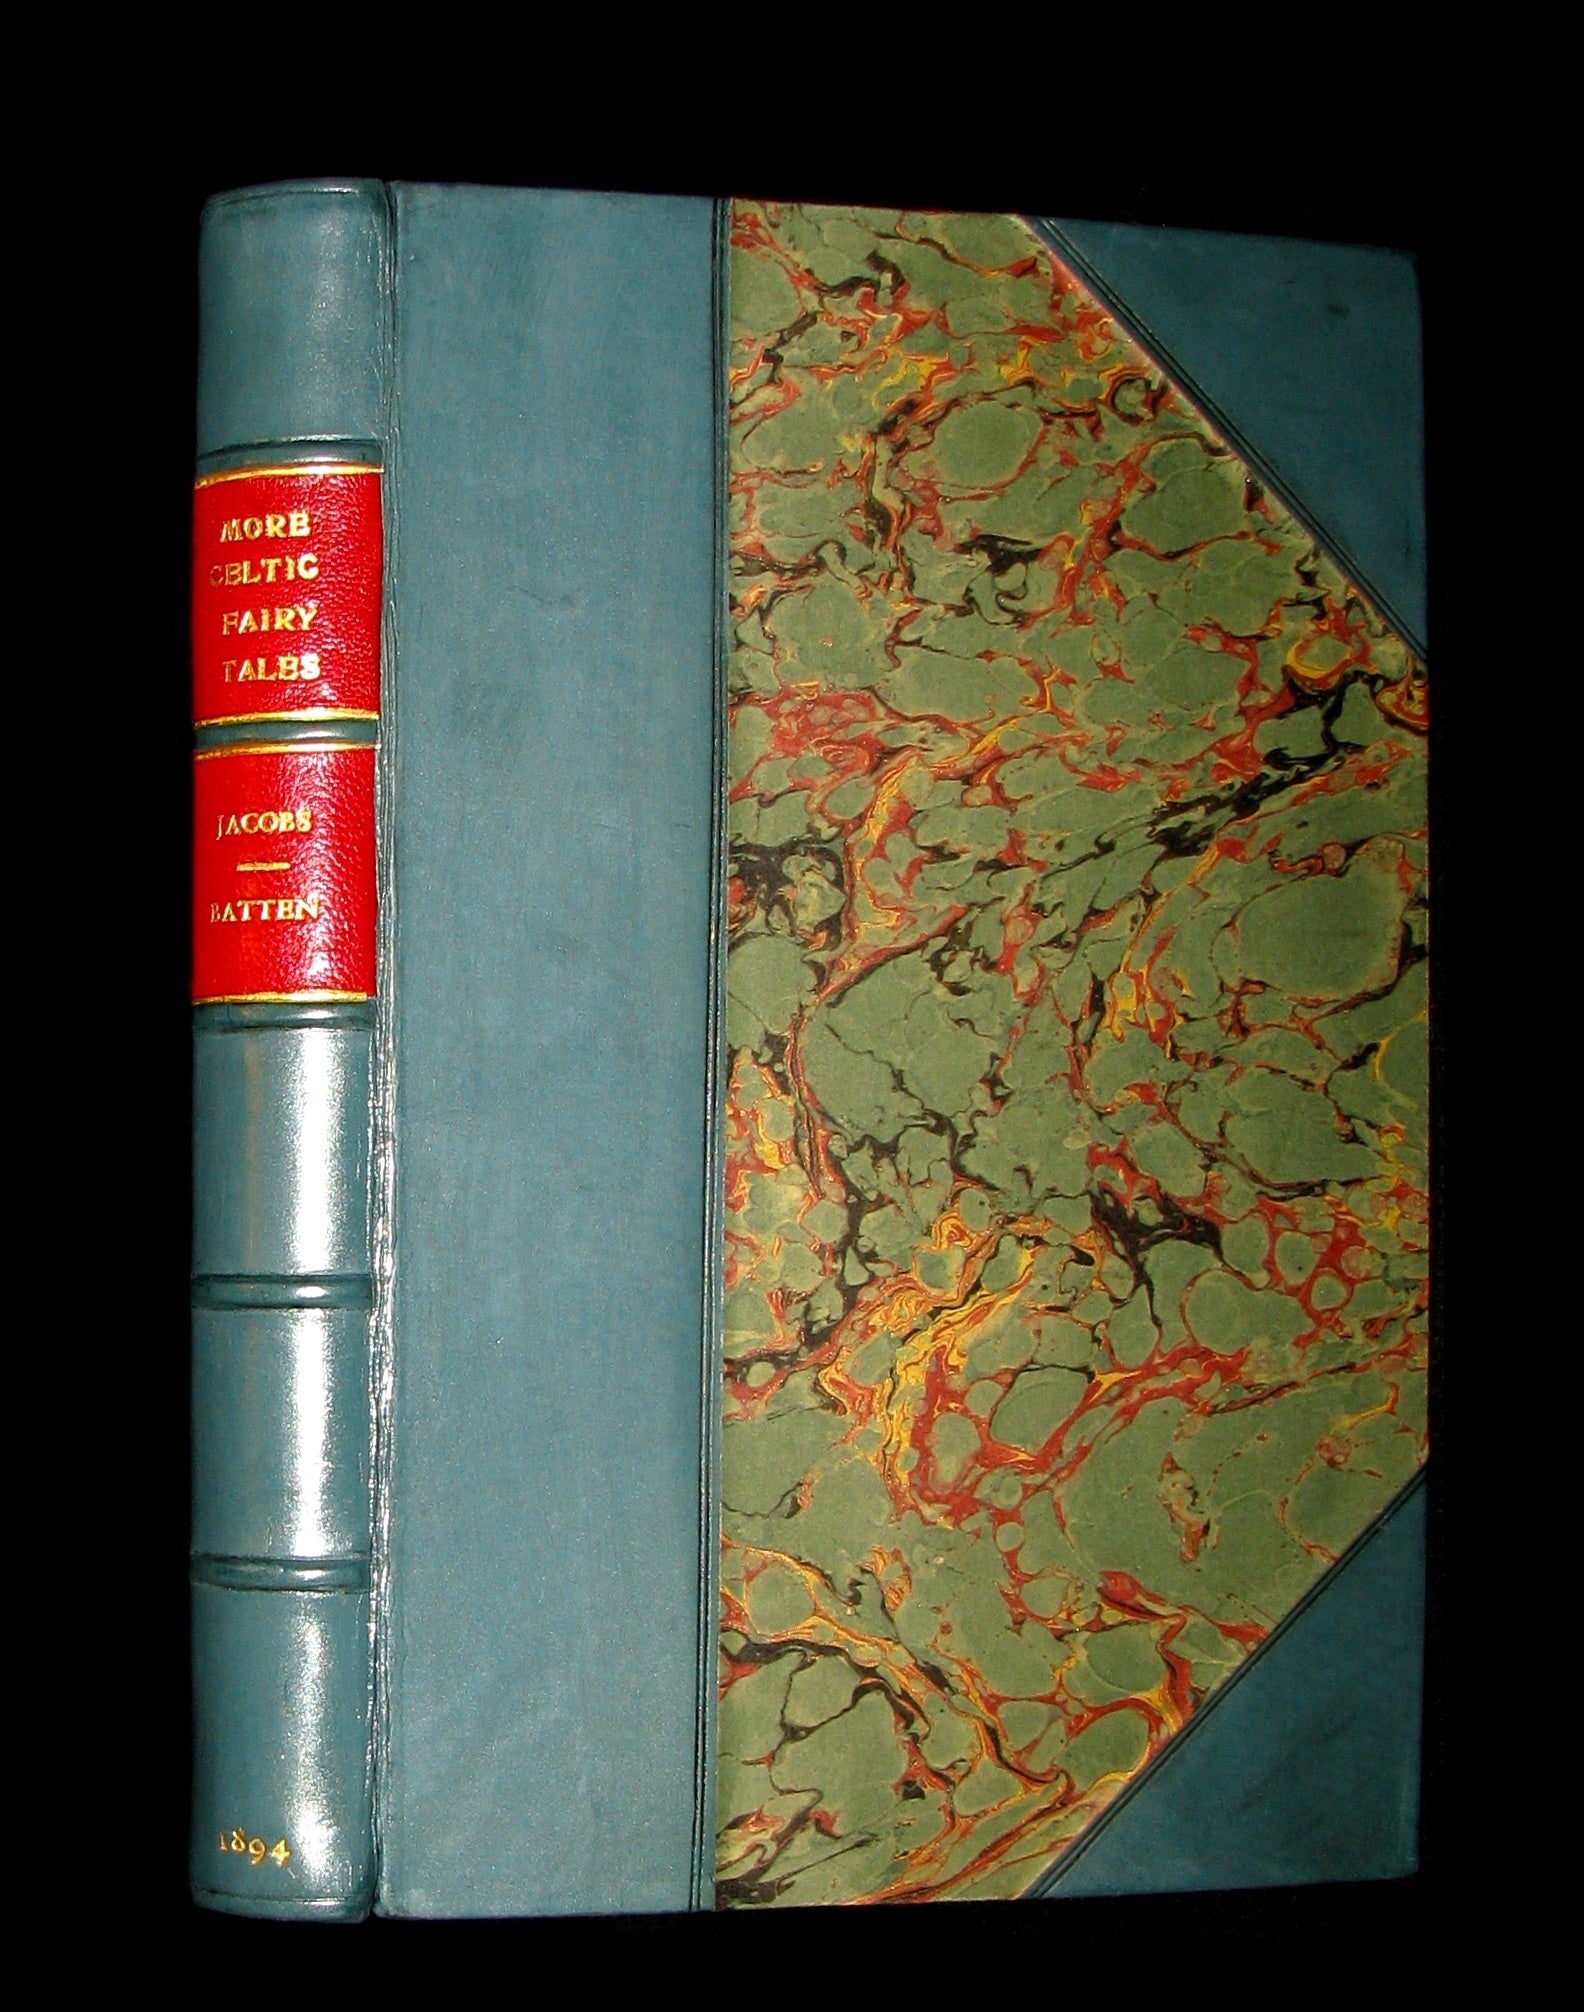 1894 Scarce LIMITED 1st EDITION #27/125 - More CELTIC FAIRY TALES by Joseph Jacobs Illustrated by John D. Batten.